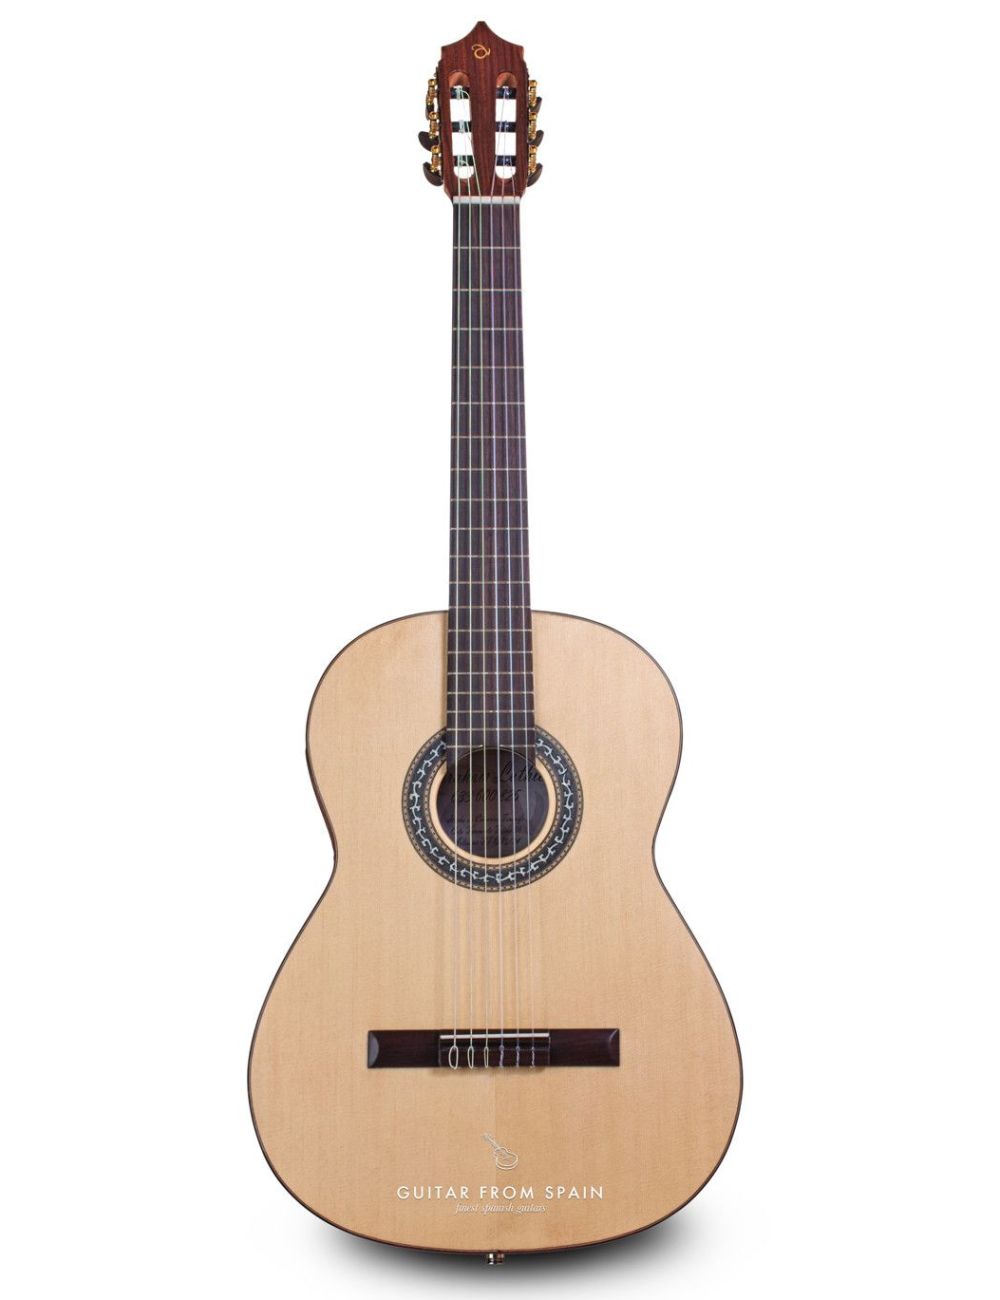 Lutherie Guitare